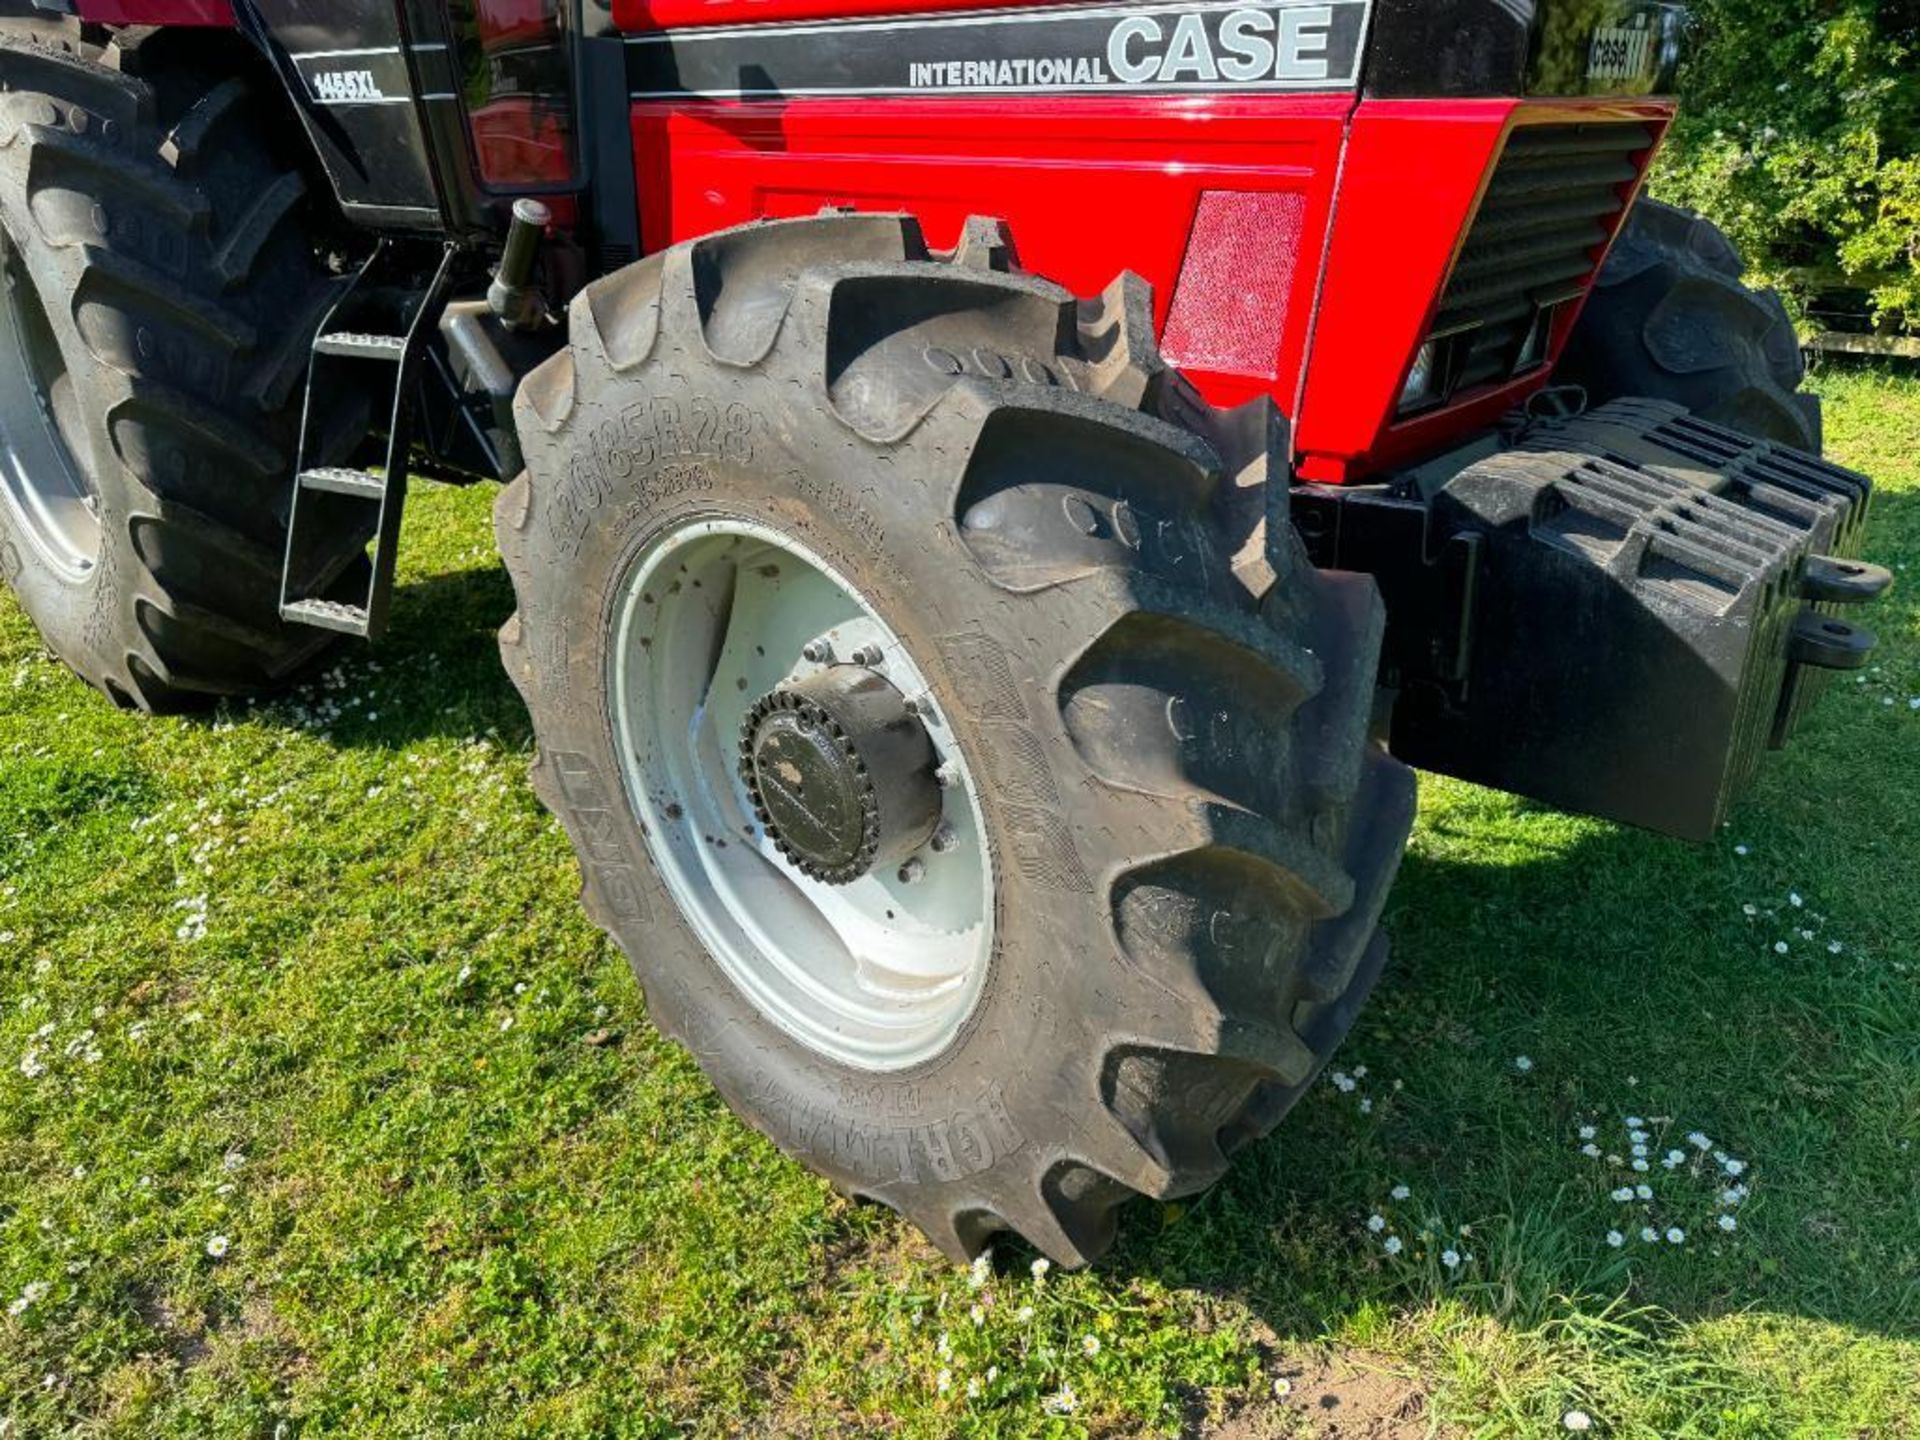 1987 Case International 1455XL 4wd tractor with 14no front wafer weights, 2 manual double acting spo - Image 6 of 26